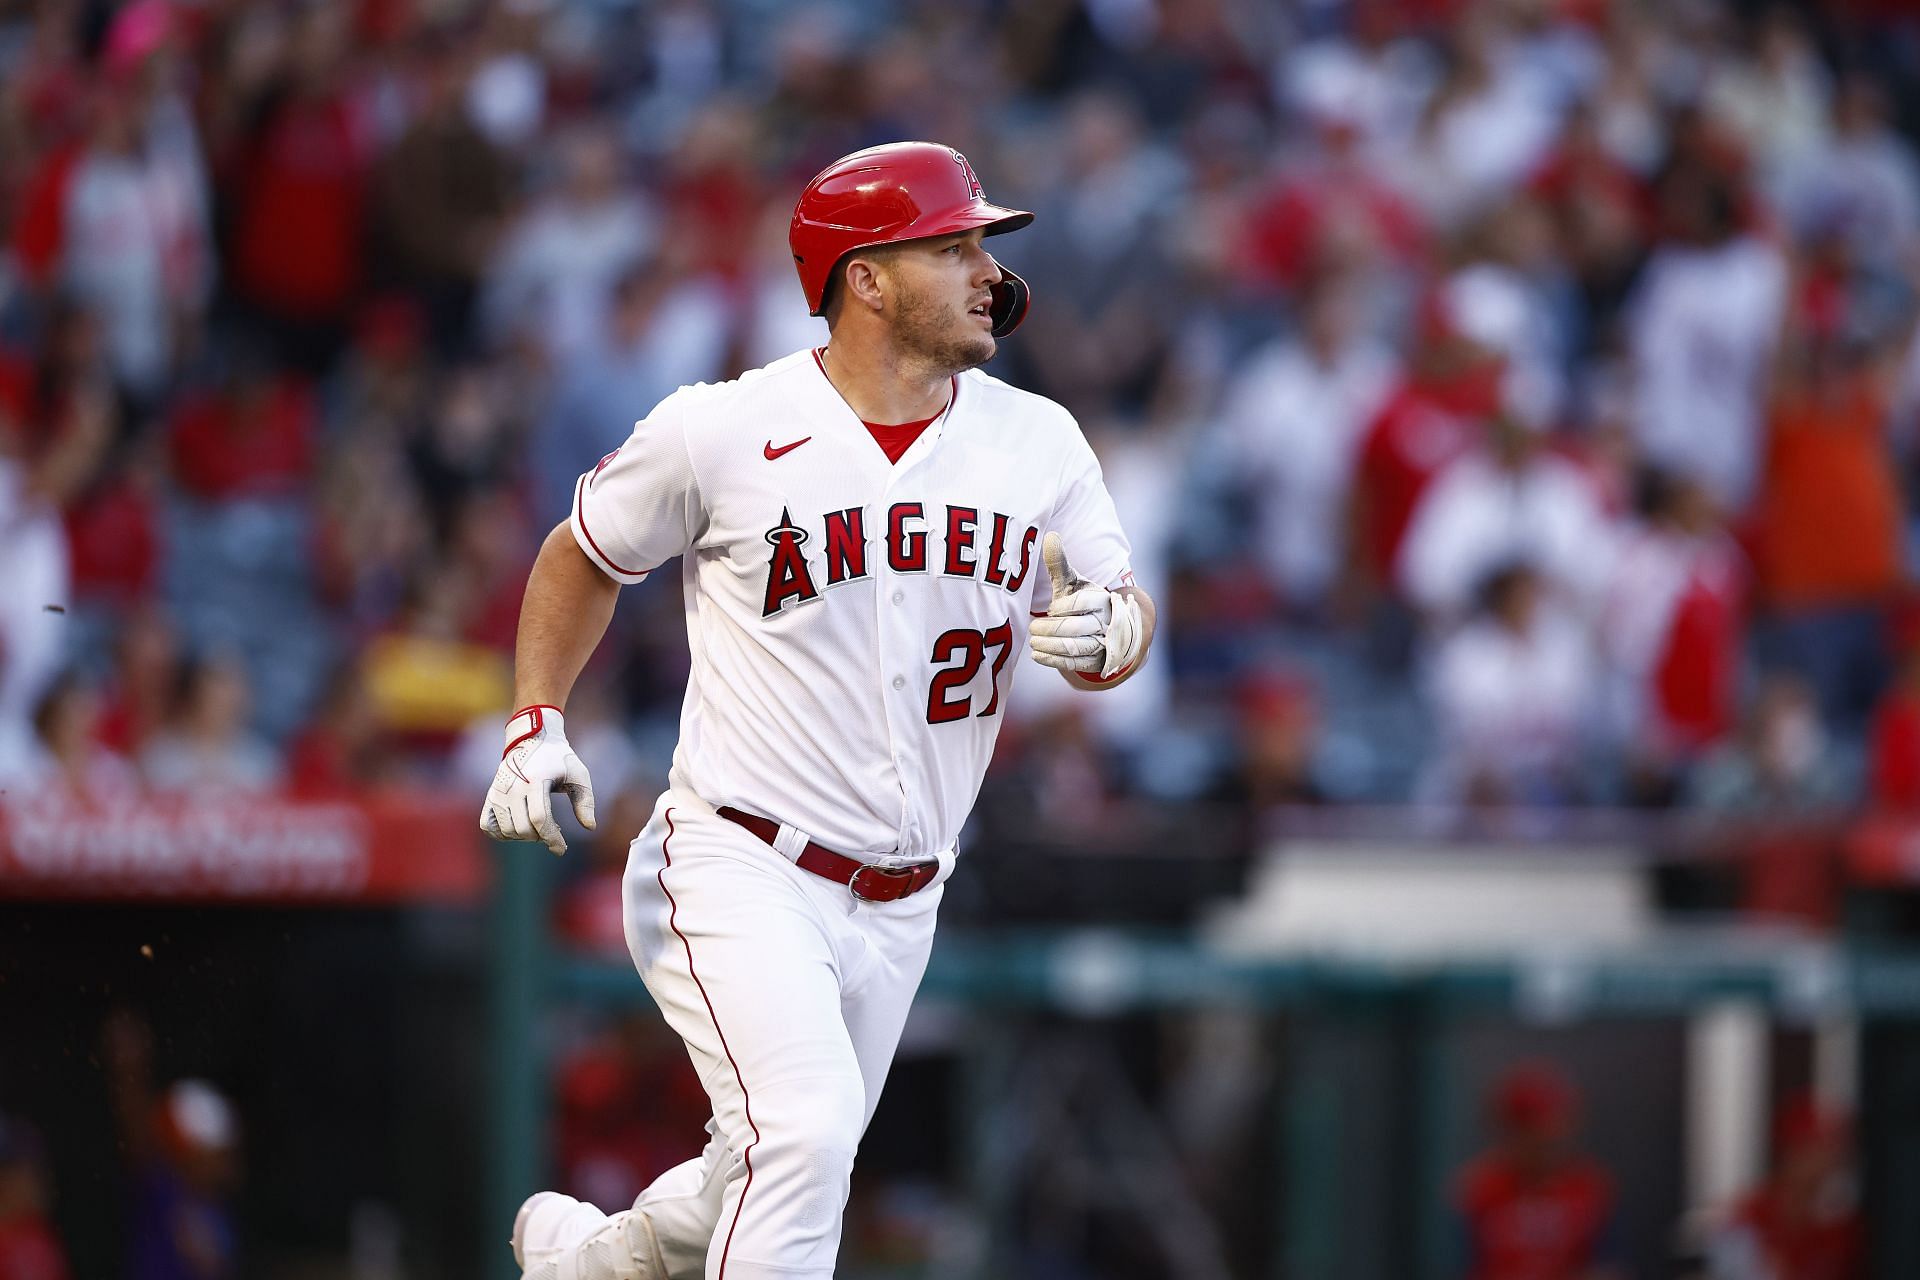 Mike Trout will be at Giants-Eagles playoff clash in Philadelphia